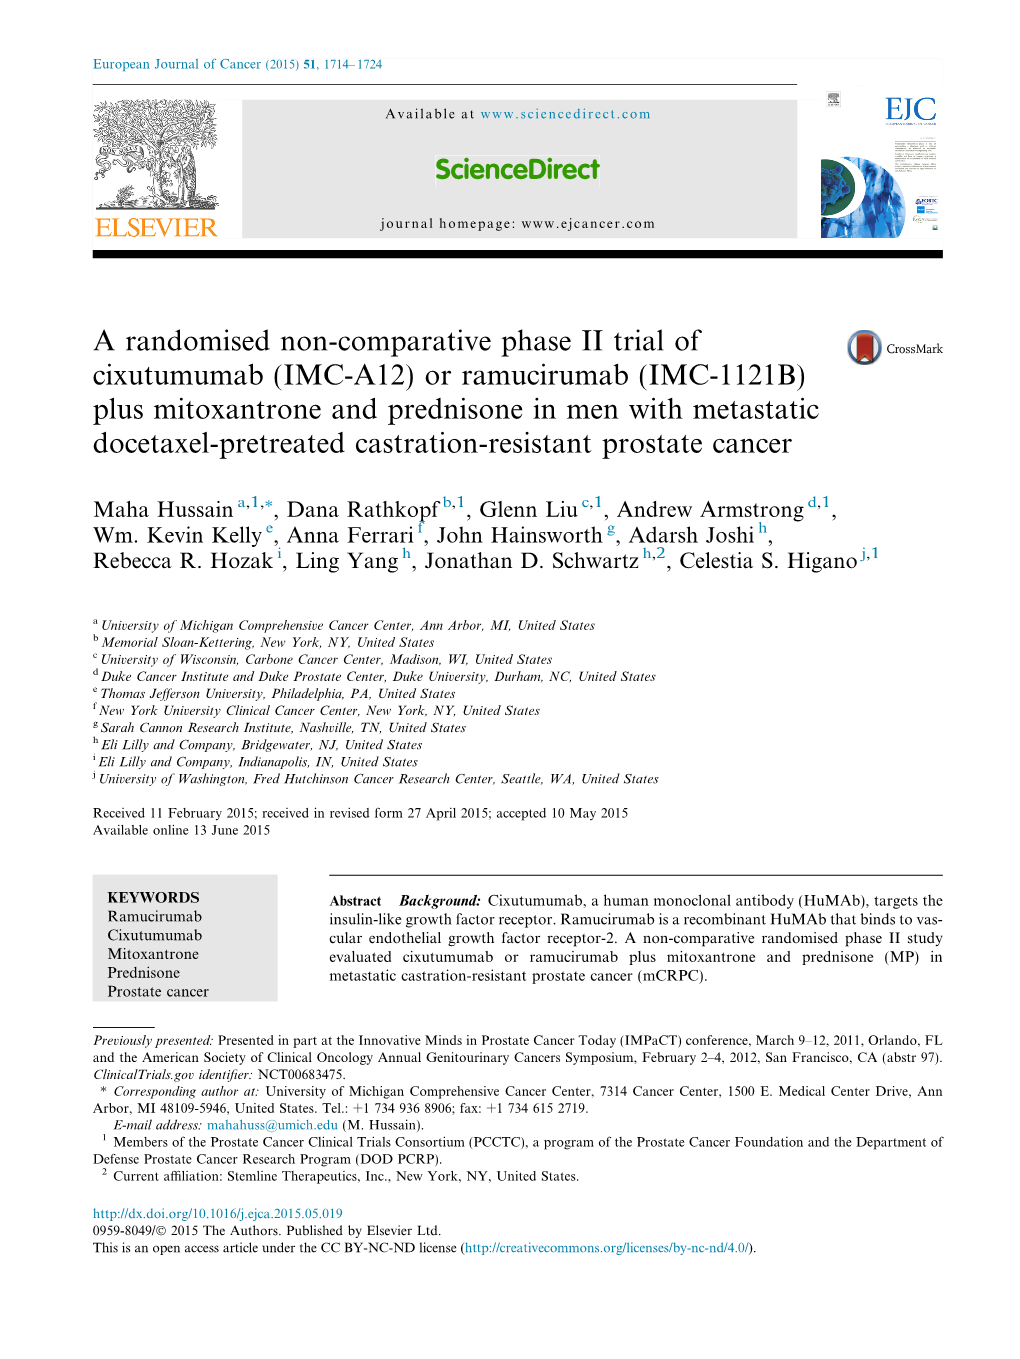 Or Ramucirumab (IMC-1121B) Plus Mitoxantrone and Prednisone in Men with Metastatic Docetaxel-Pretreated Castration-Resistant Prostate Cancer